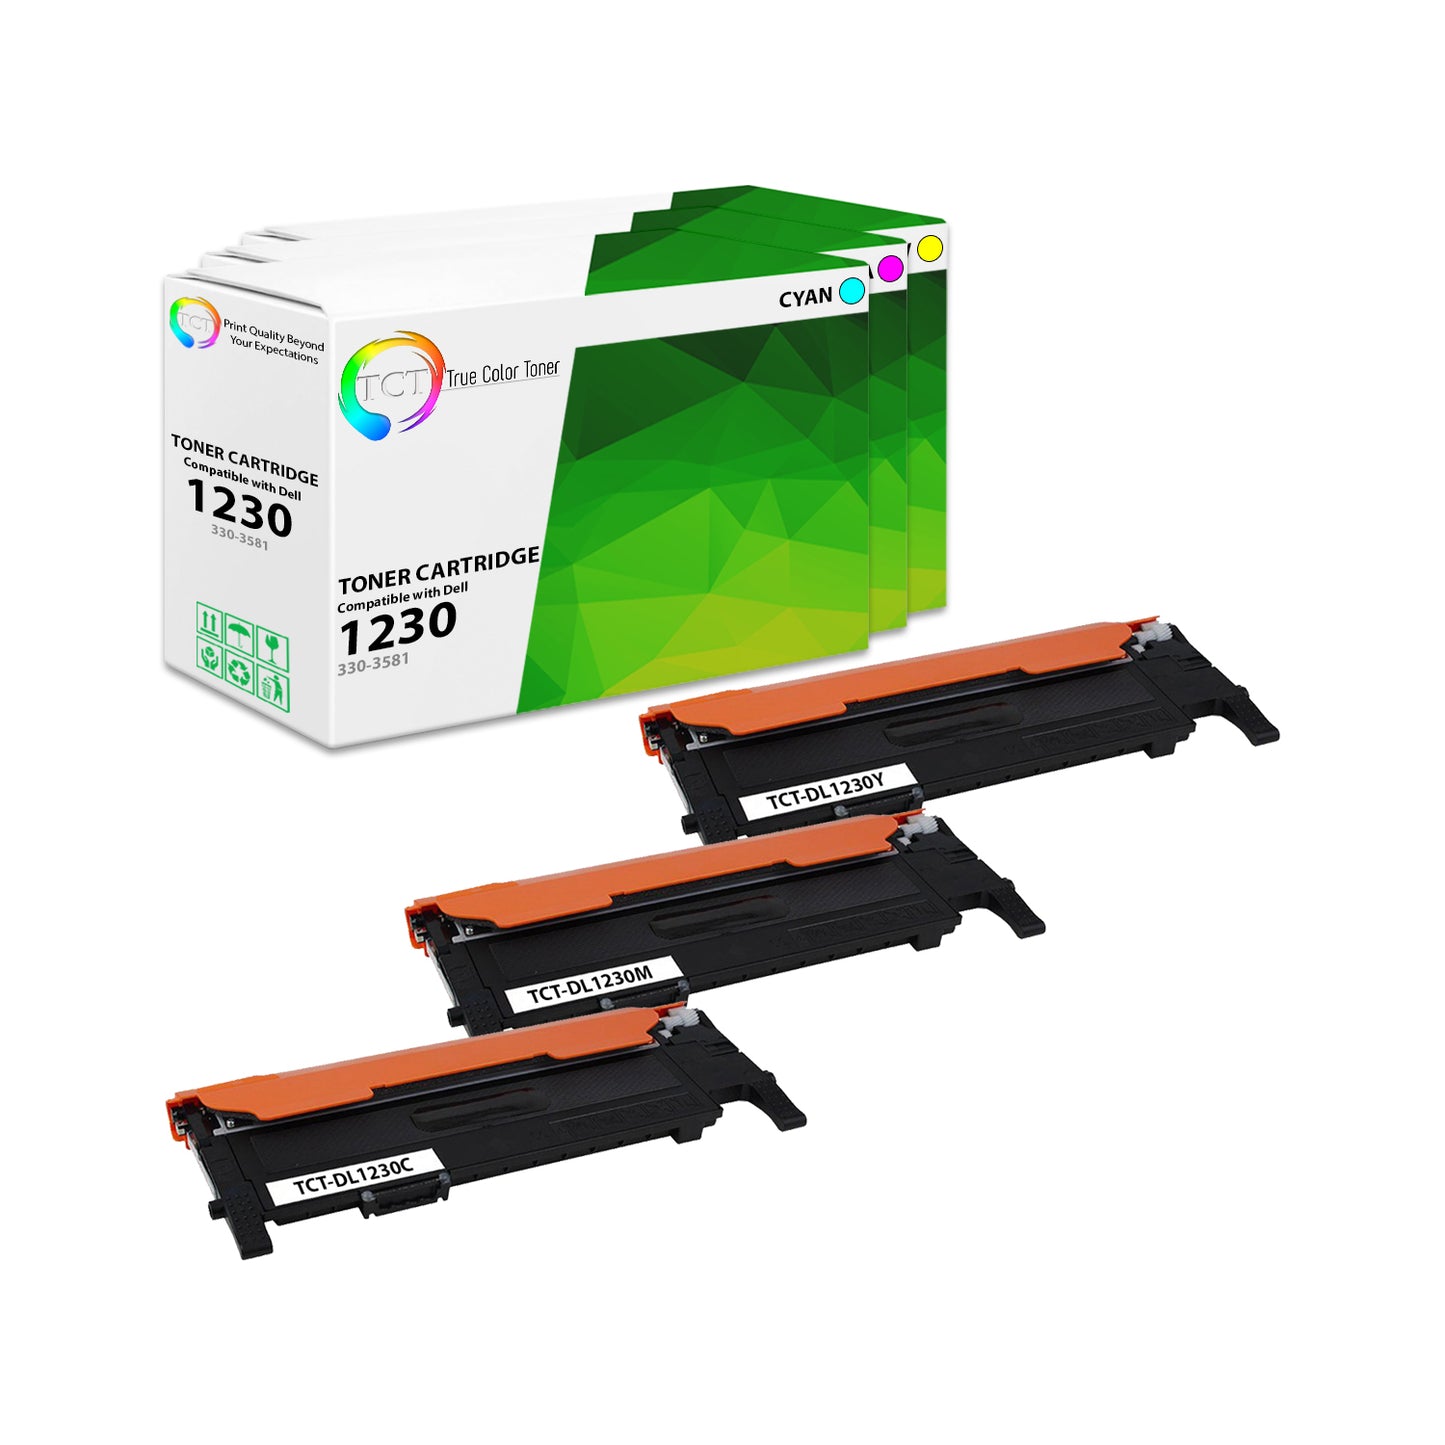 TCT Compatible Toner Cartridge Replacement for the Dell 1230 Series - 3 Pack (C, M, Y)